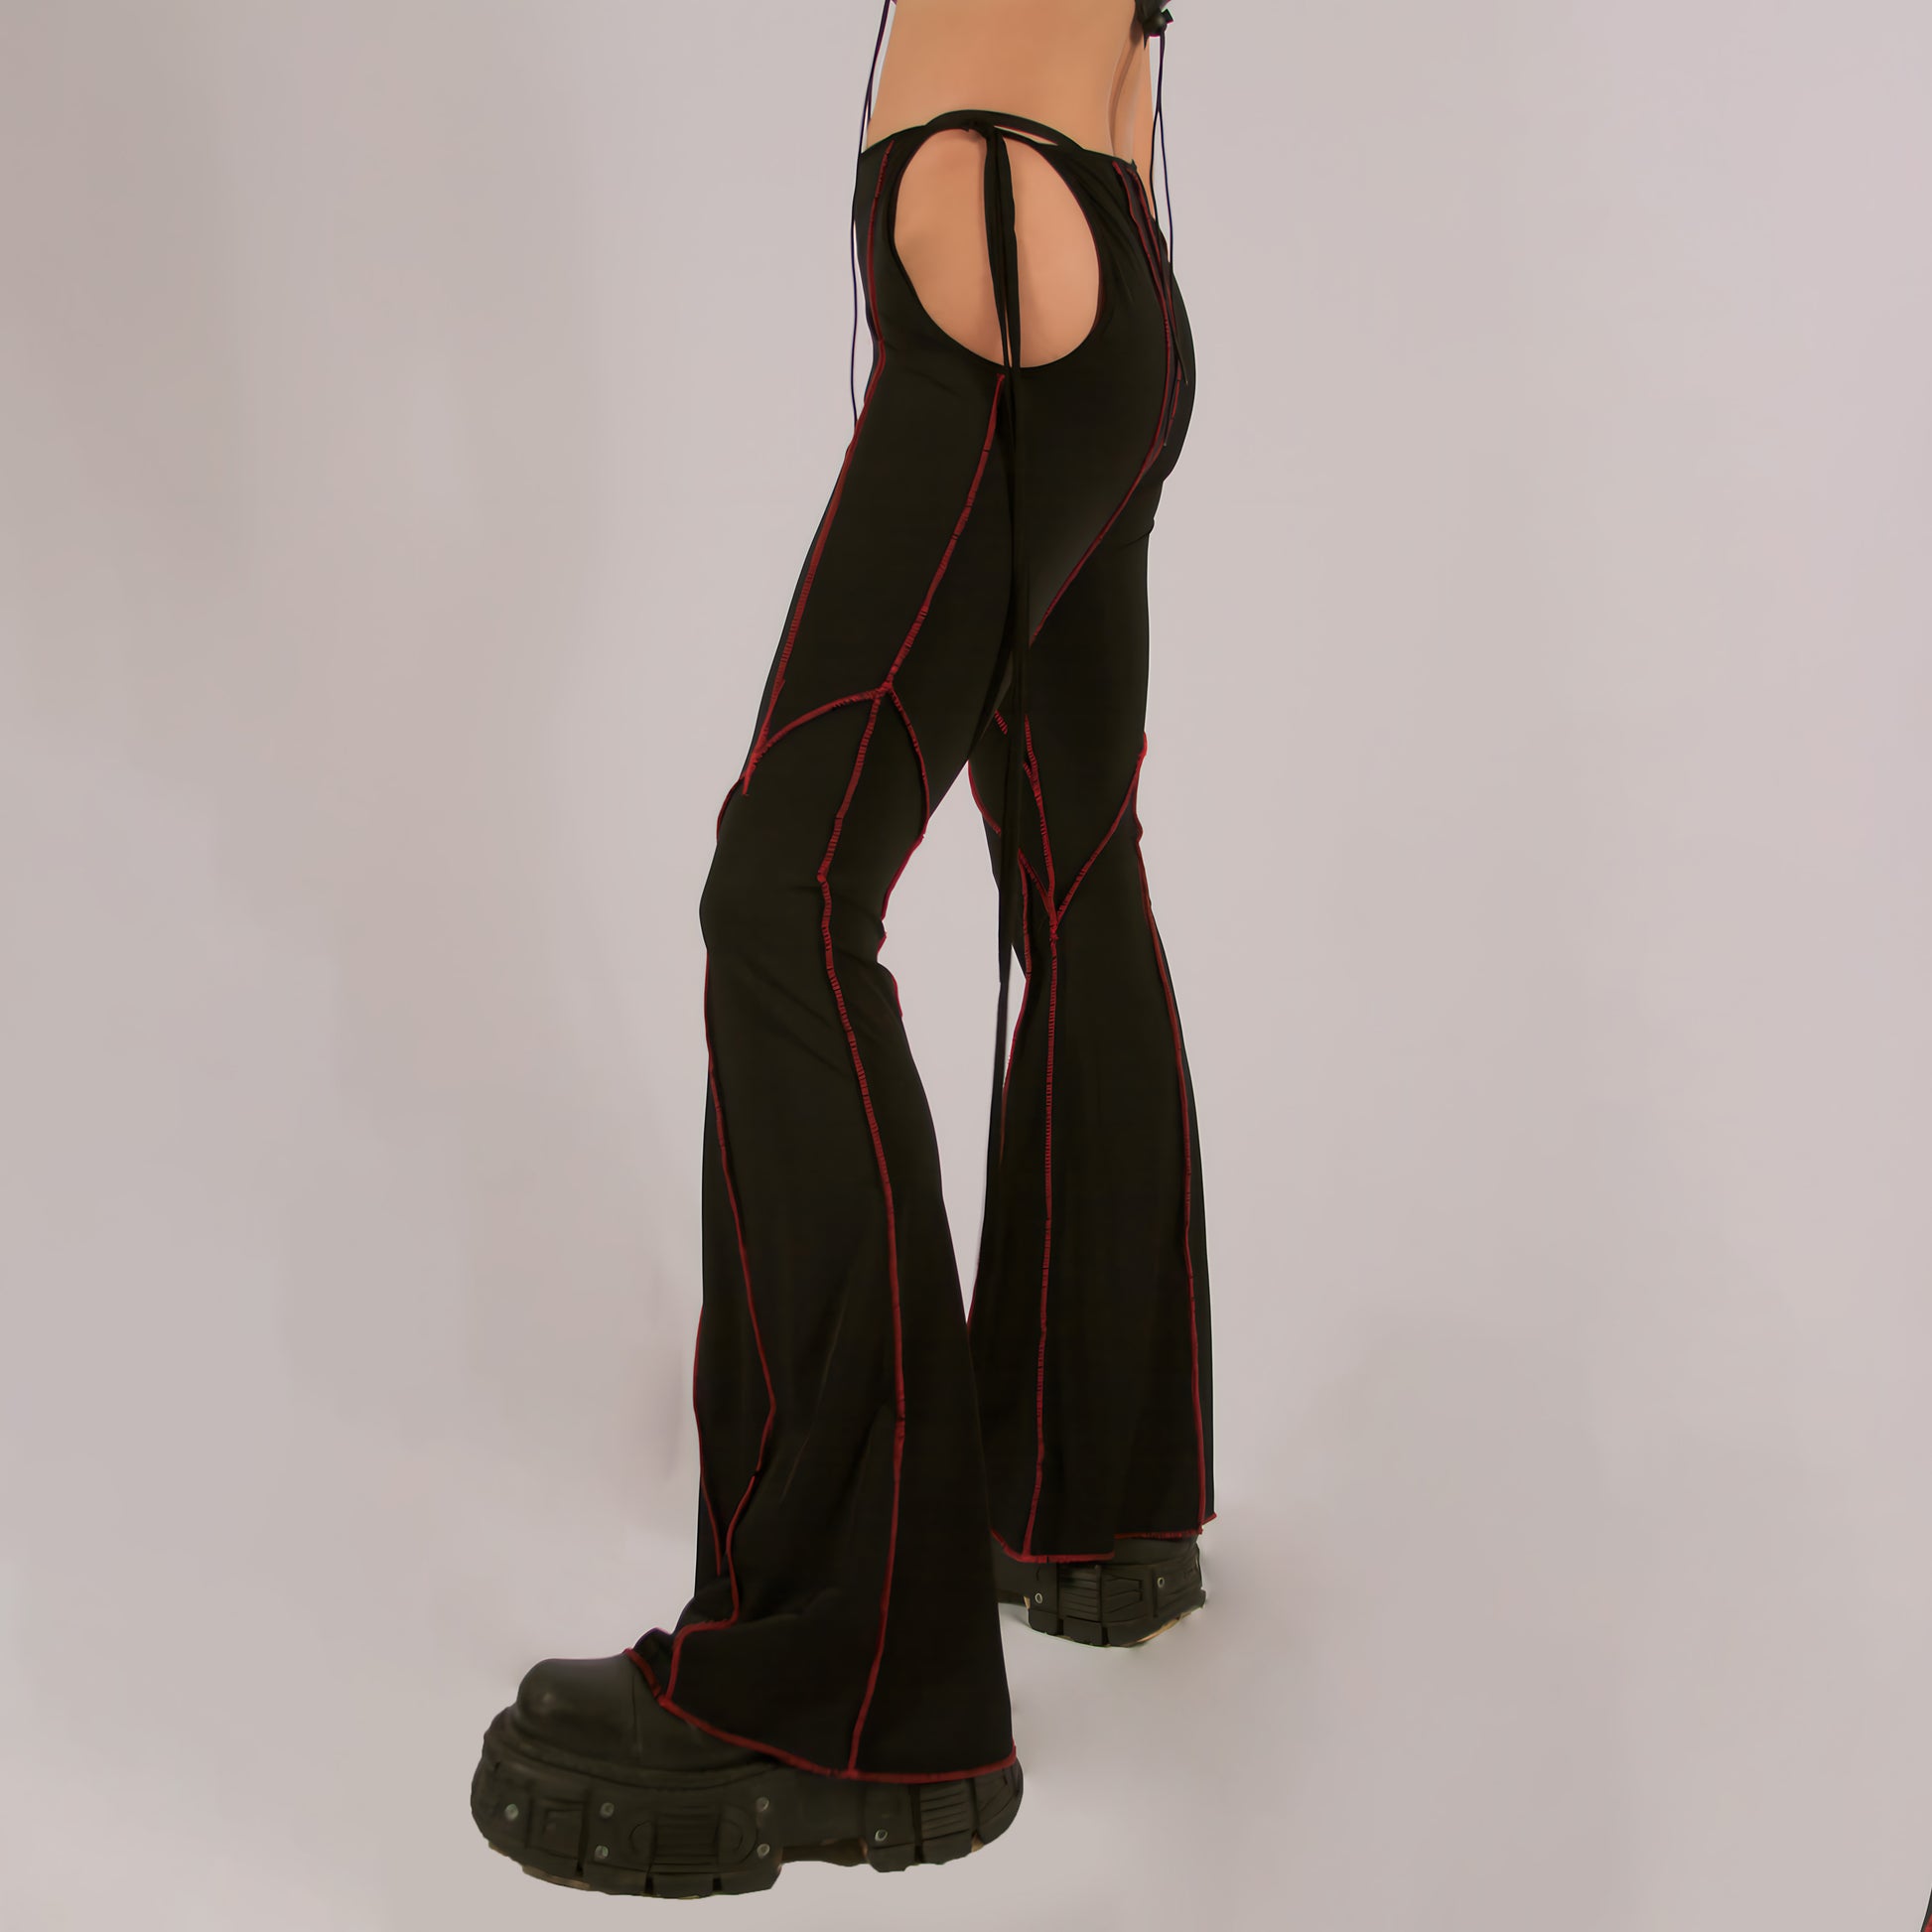 Black rave pants - Soft Lycra visible seams in red color, super easy an very confortable fit, elasticized fabric adjusts at the waist with ties